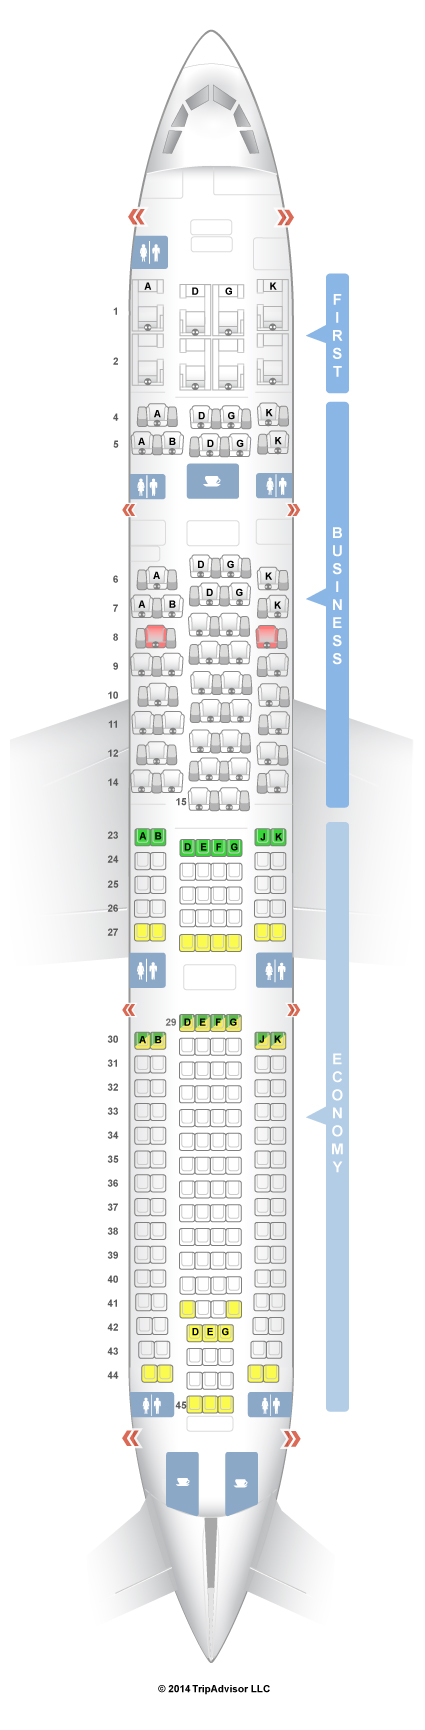 A343 Jet Seating Chart